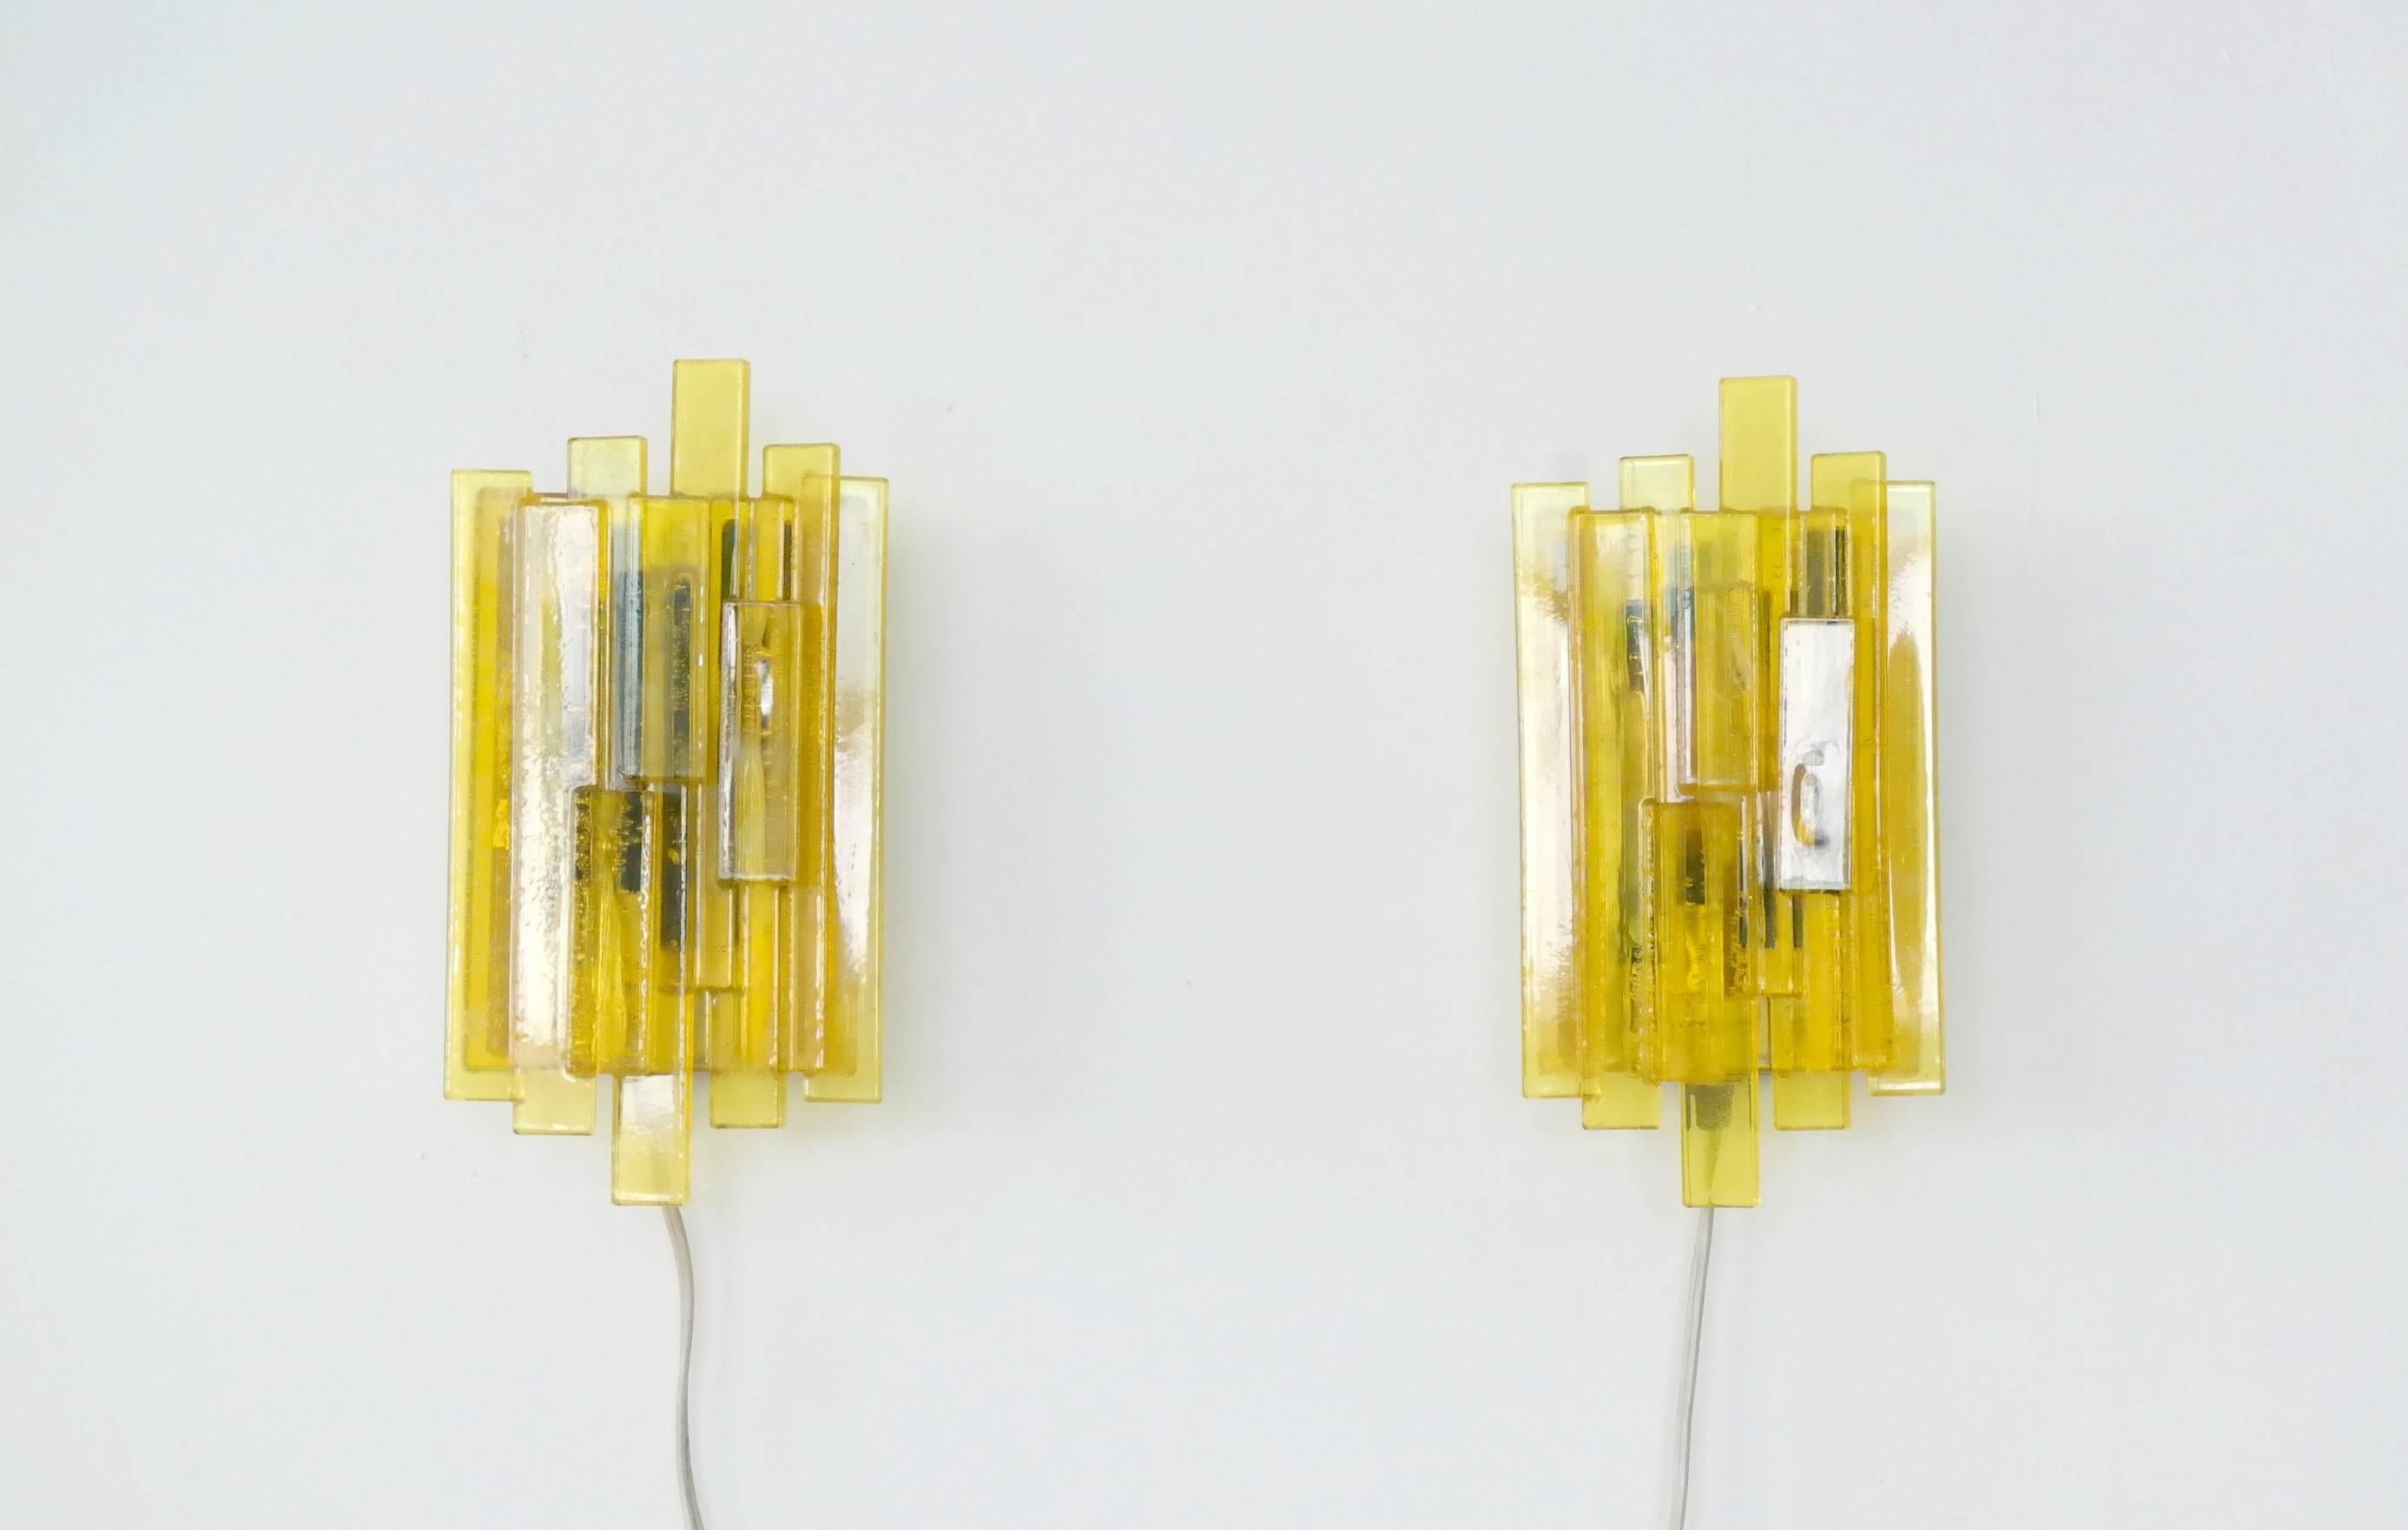 Very attractive pair of Space Age geometric wall sconces by Danish designer Claus Bolby. Made circa 1970 from yellow acrylic resin of different shapes and sizes on top of green acrylic in the center. Excellent condition.
 